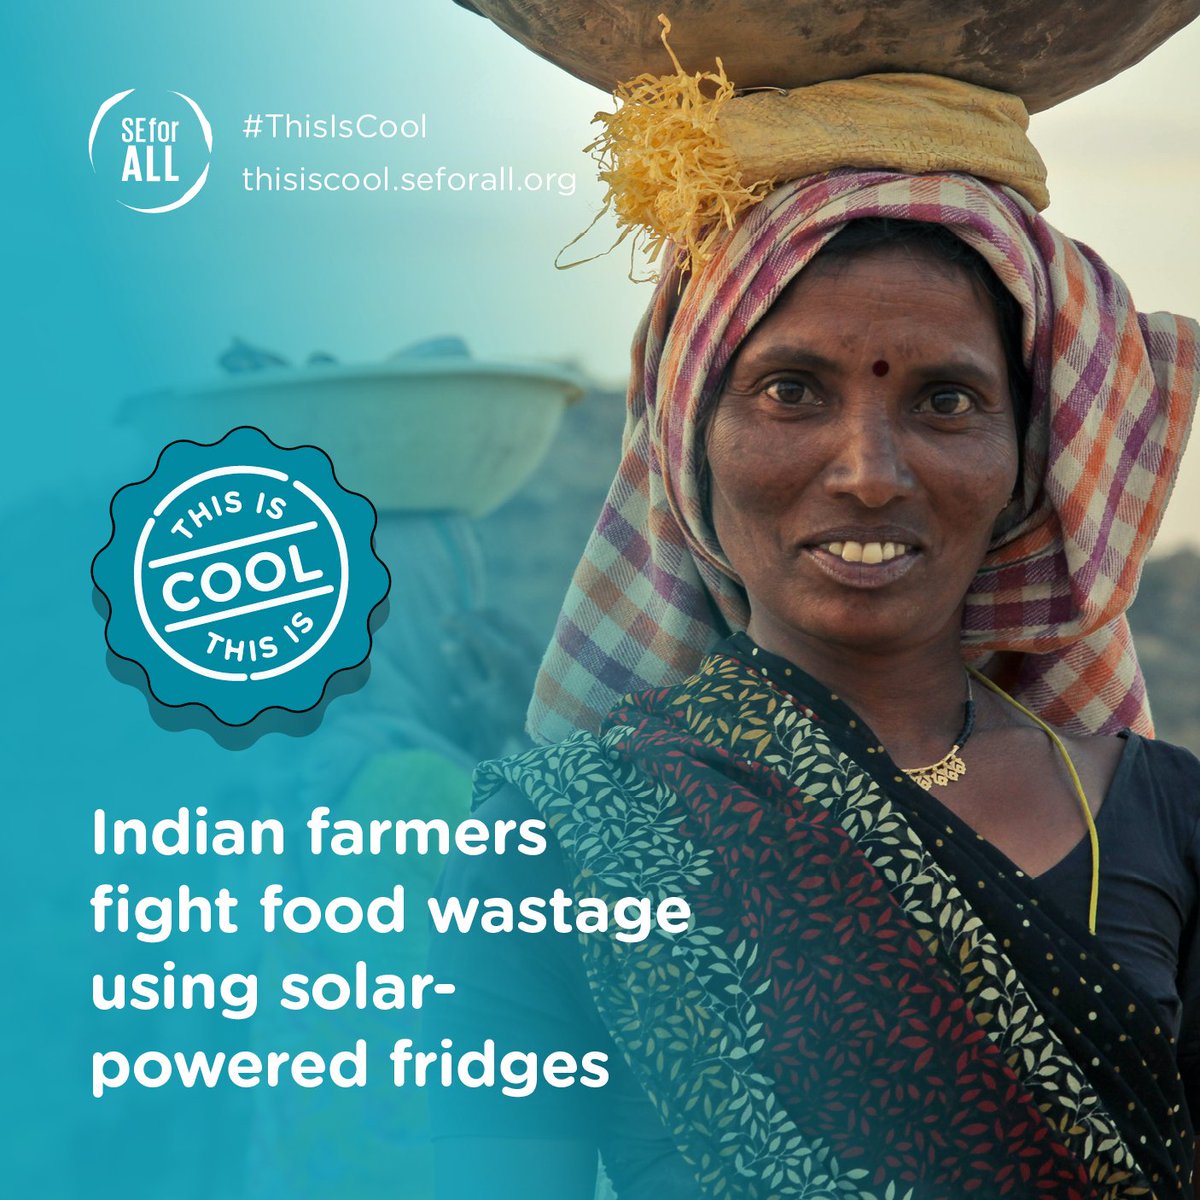 As #climatechange brings more extreme weather to #India 🇮🇳, sustainable #coldchain storage units help off-grid farms to deal with the heat. #ThisIsCool! ❄️  

Full story here 🔗 ow.ly/g2tU50OyX7b 
#CoolingForAll #coldchain #SDG7 #ActOnCooling